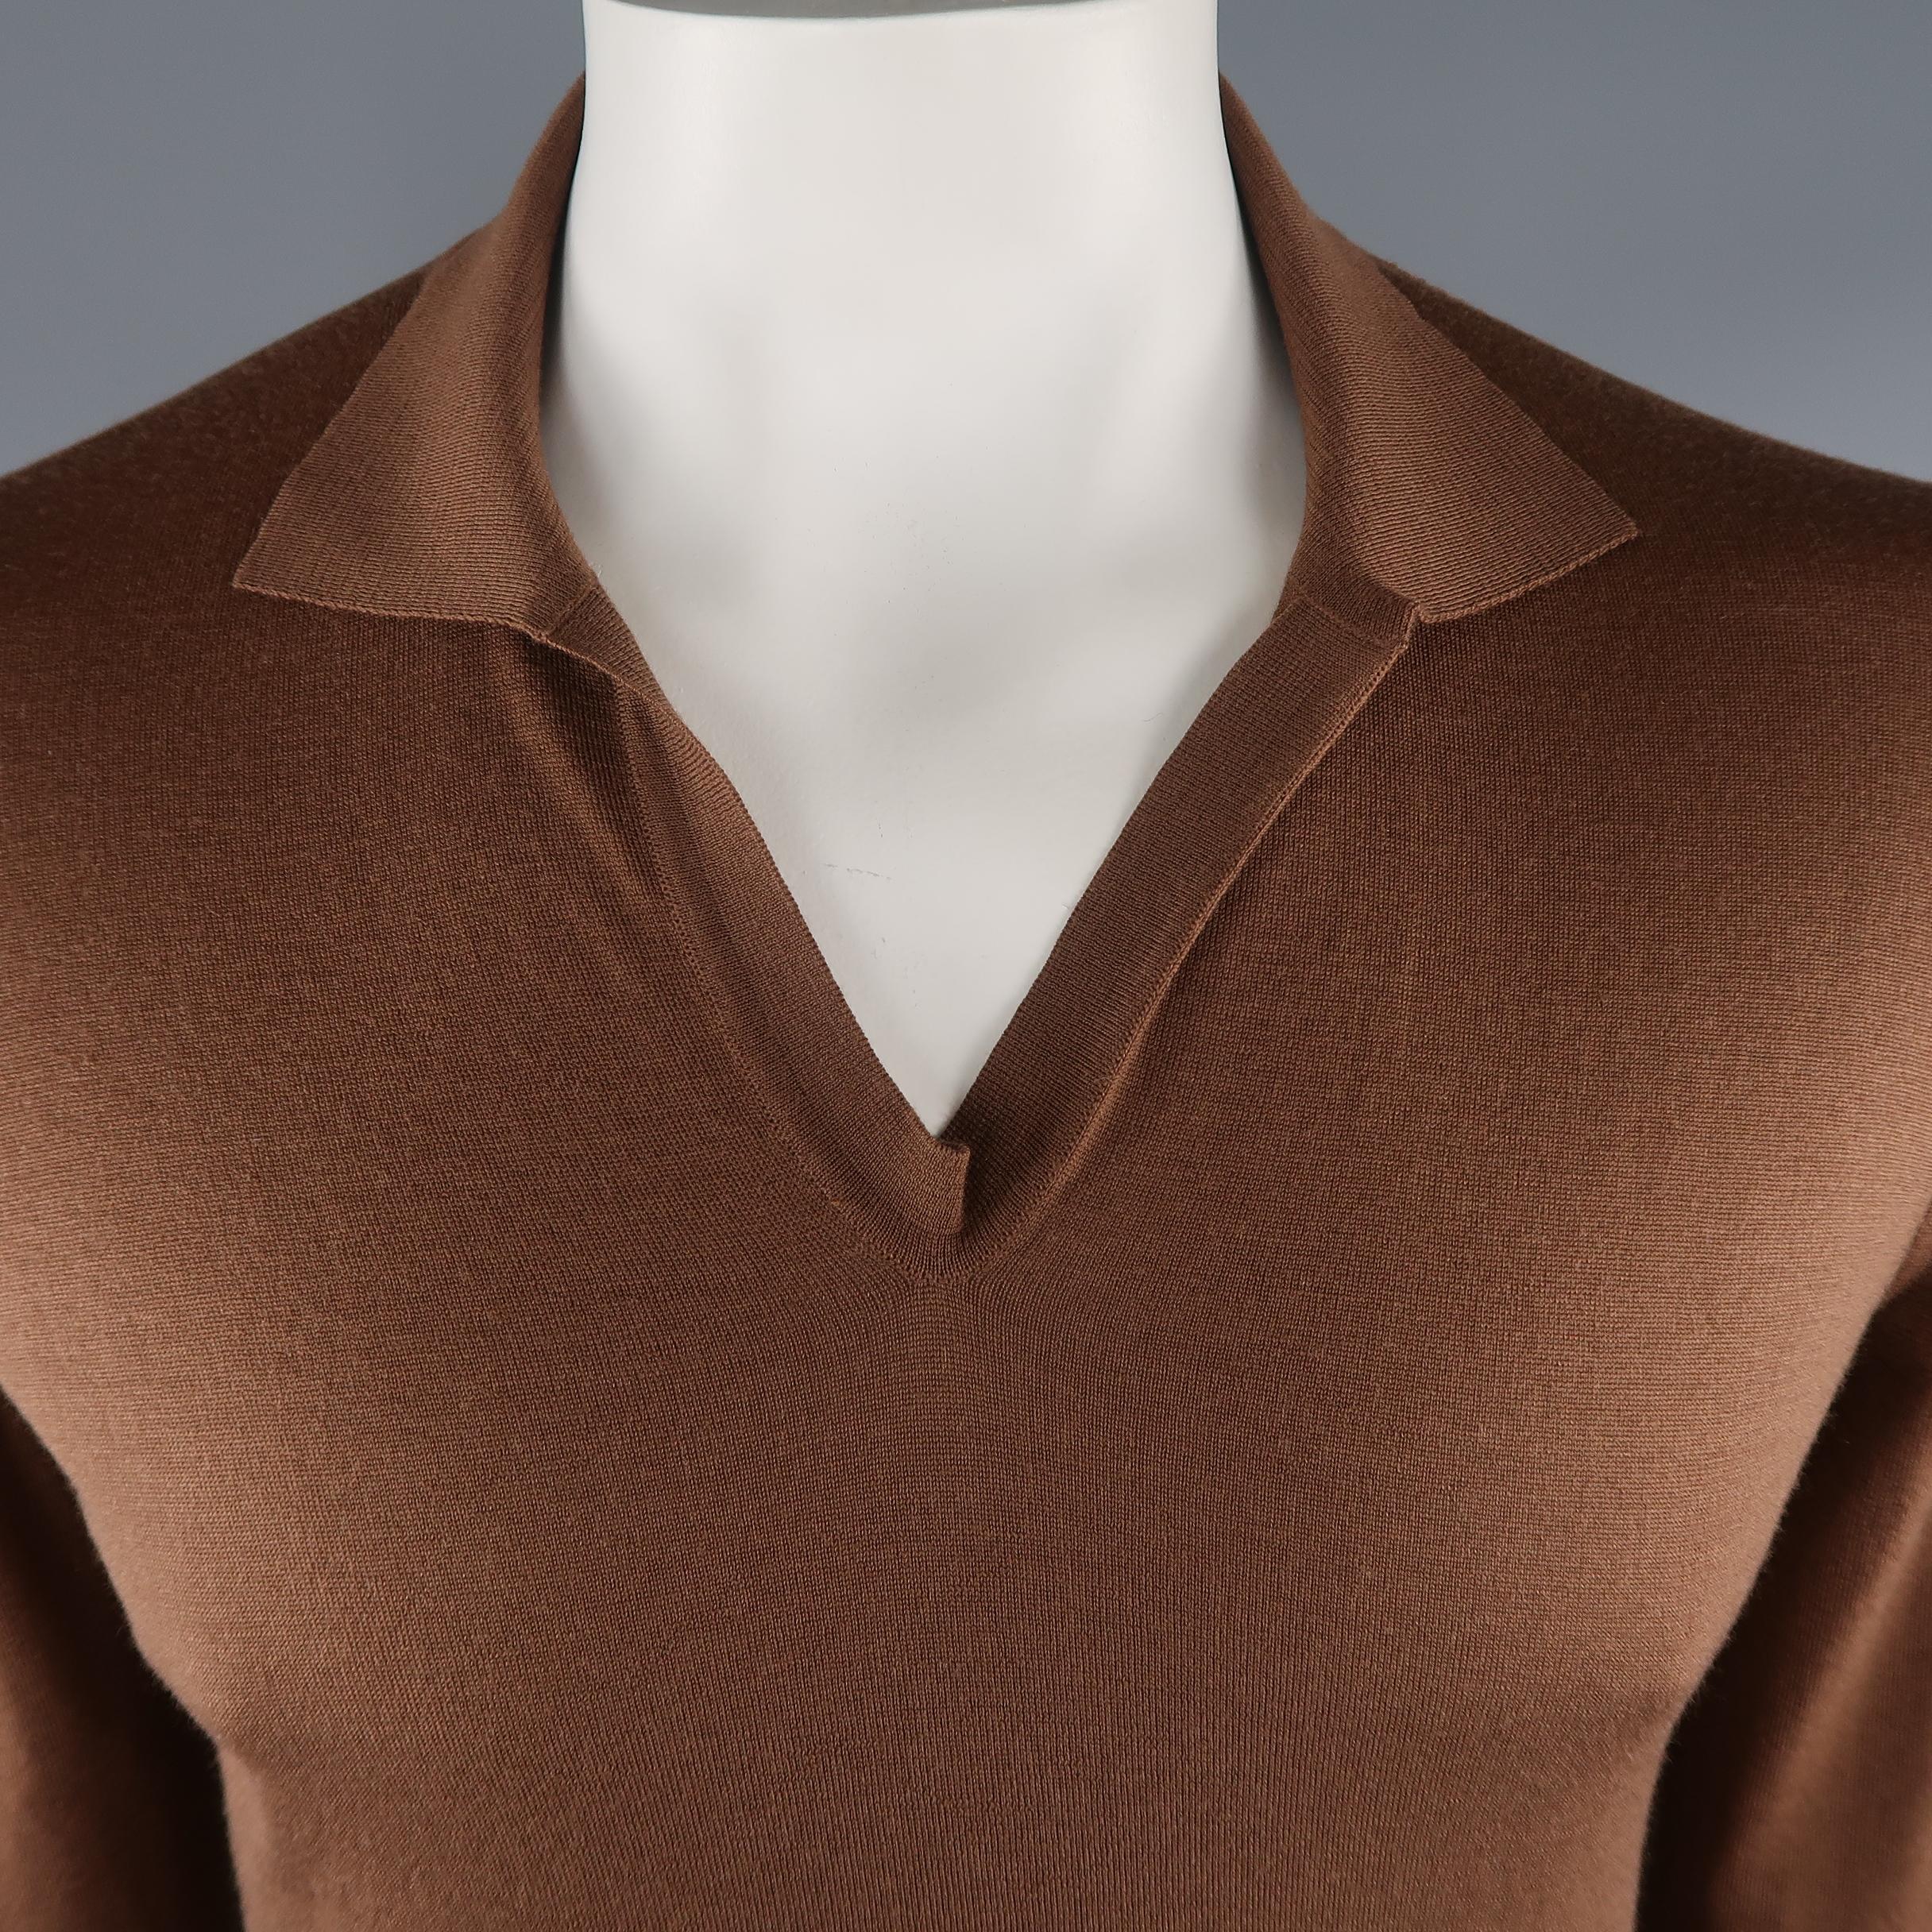 MAISON MARTIN MARGIELA pullover sweater come in brown solid wool, with open collar and ribbed cuff and hem. 

Made in Romania. 
Excellent Pre-Owned Condition.
Marked: size tag removed
 
Measurements:
 
Shoulder: 17 in.
Chest: 42 in.
Sleeve: 28.5